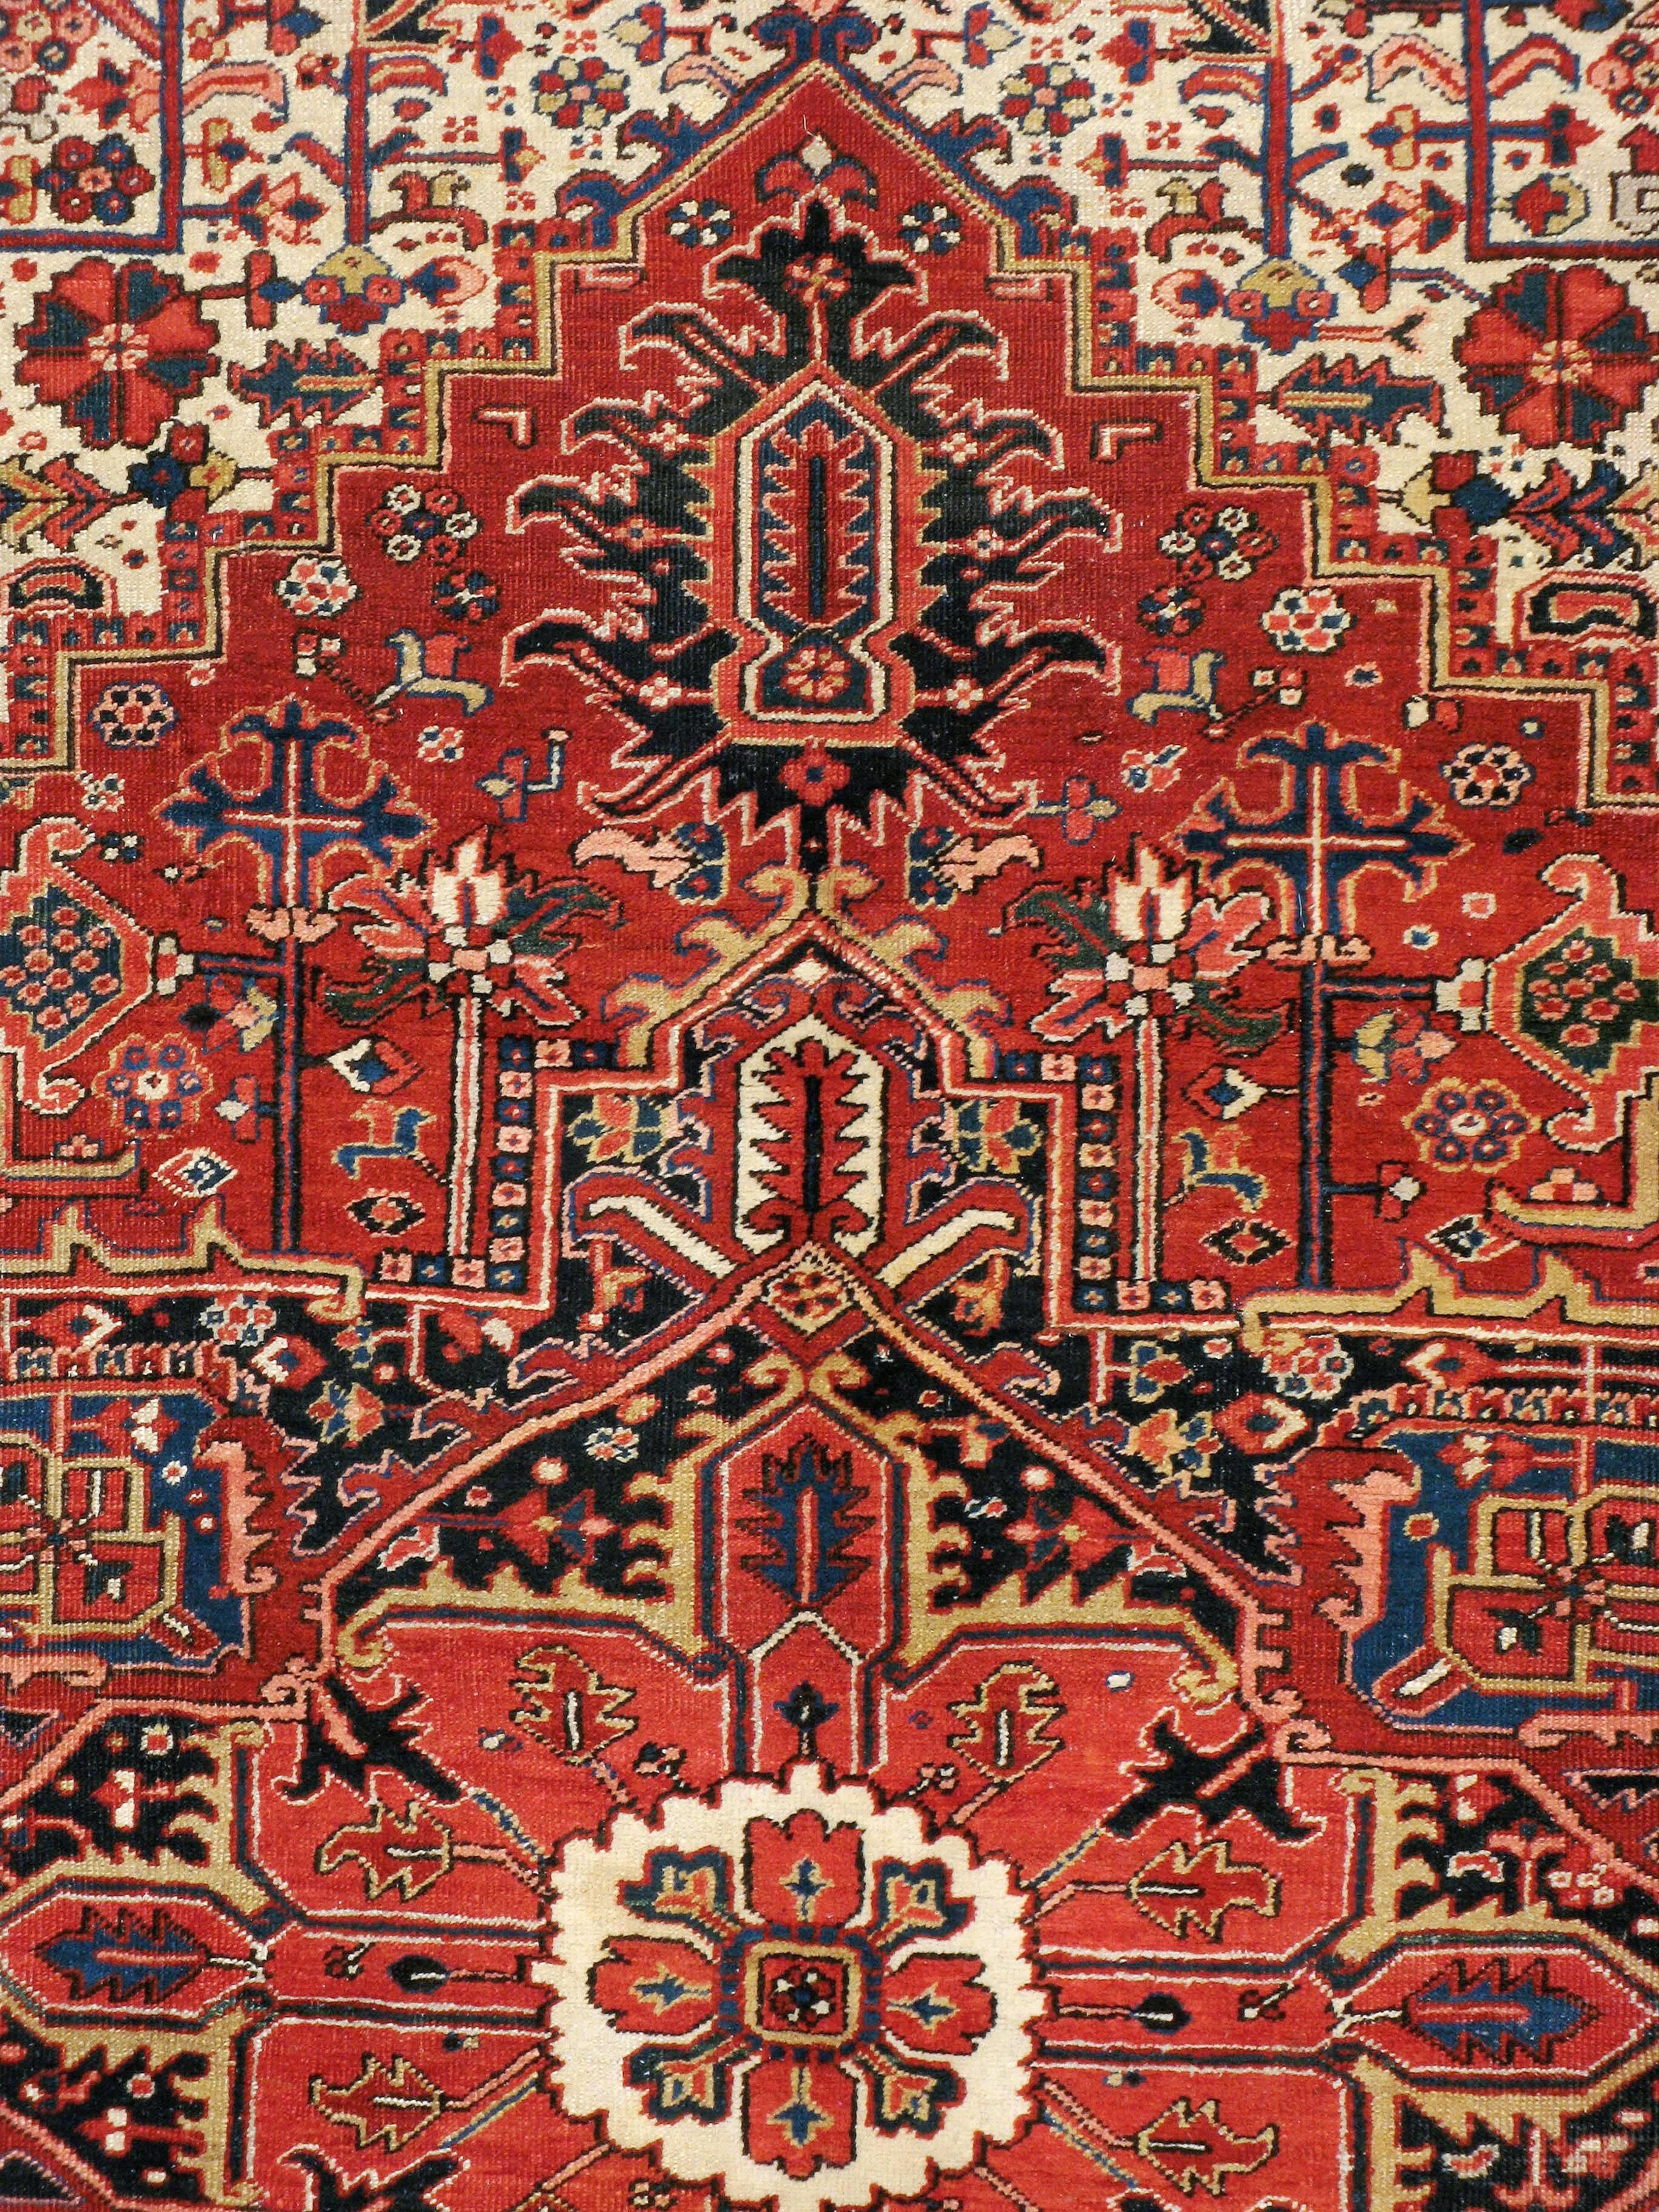 A vintage Persian Heriz rug from the second quarter of the 20th century.